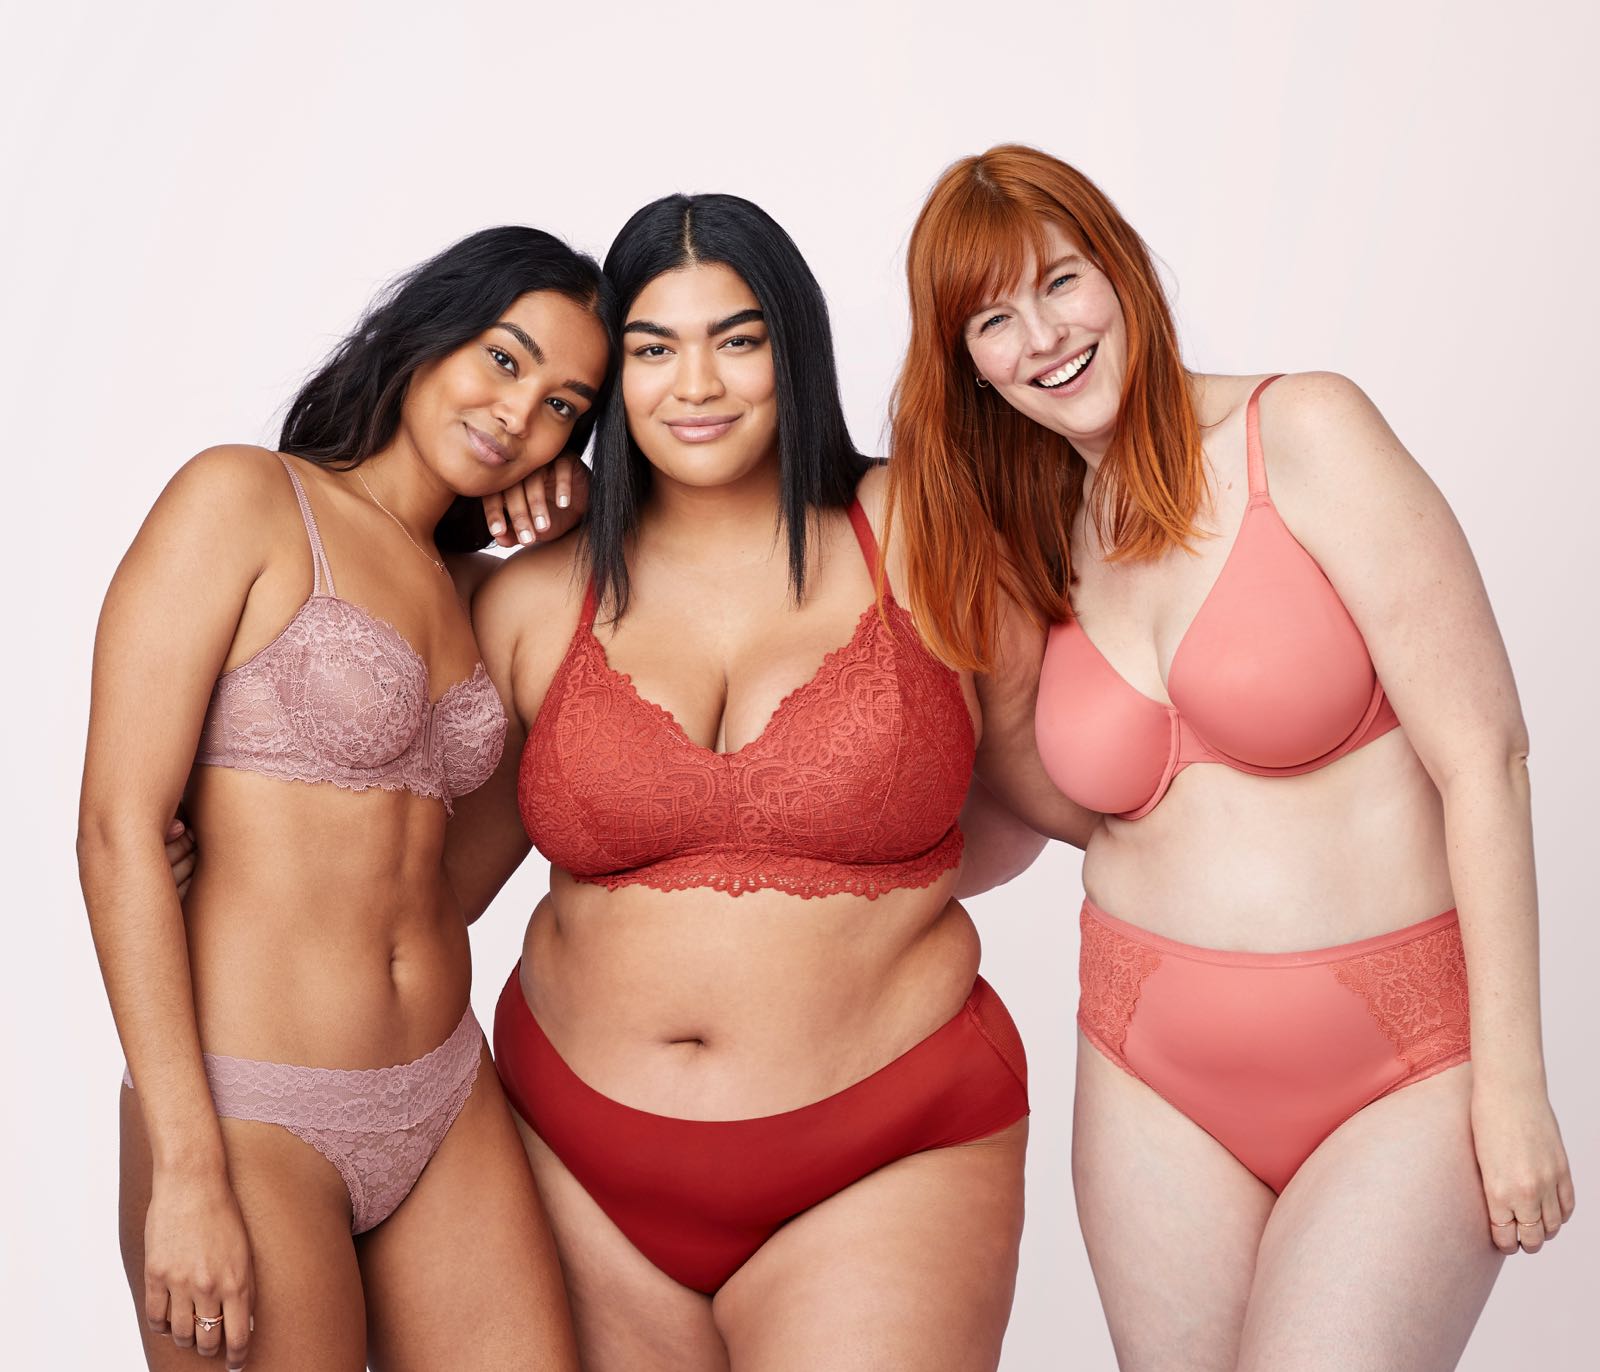 Target is introducing three new, size-inclusive brands for lounge/sleepwear and intimates